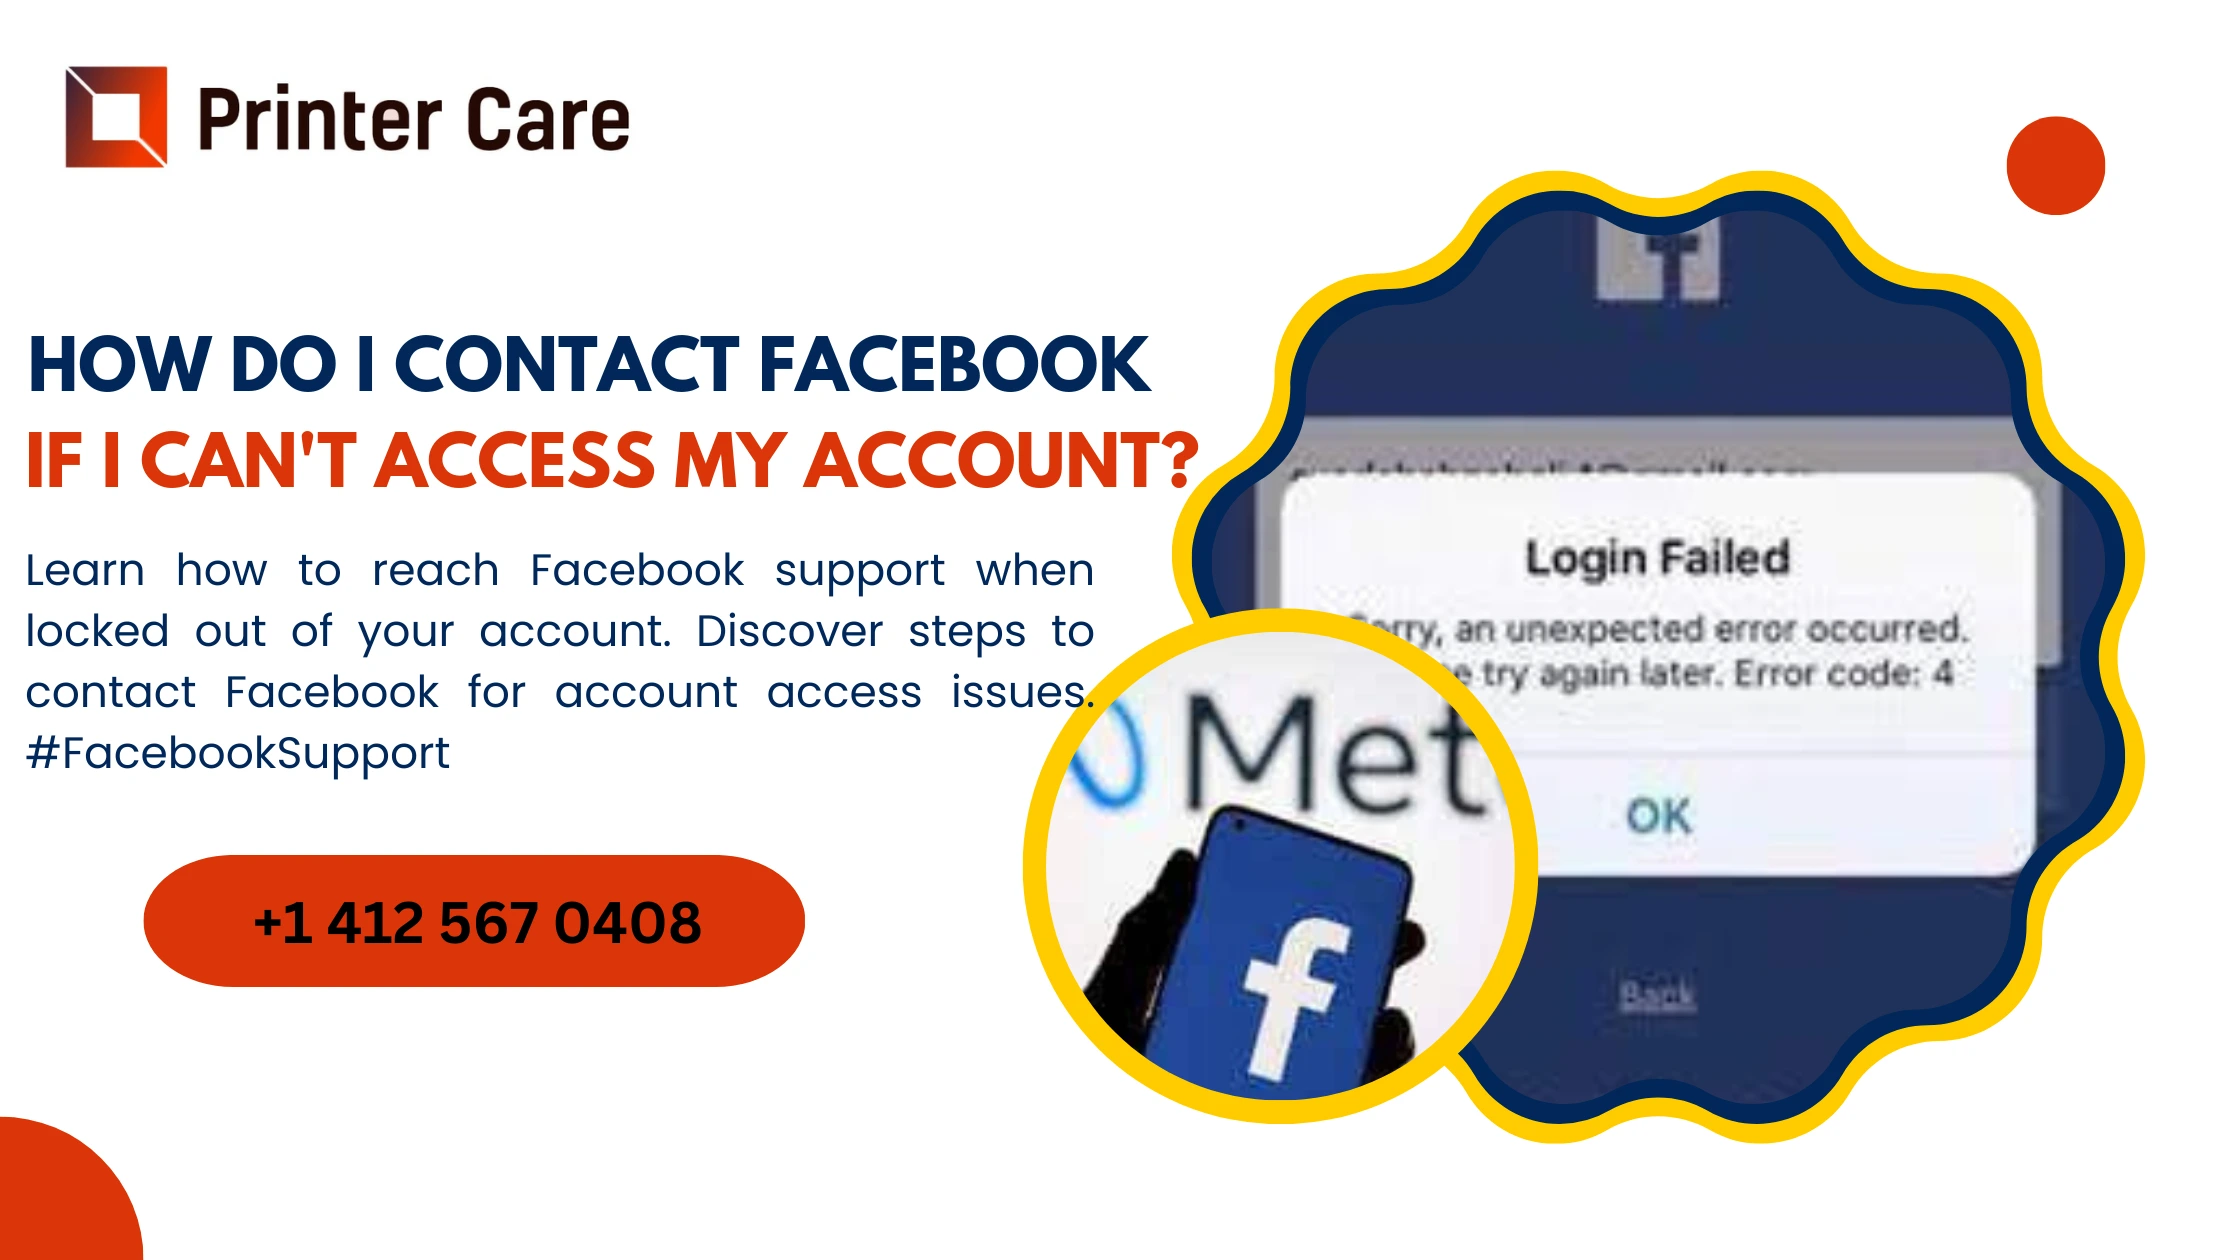 How do I Contact Facebook if I cant access my account